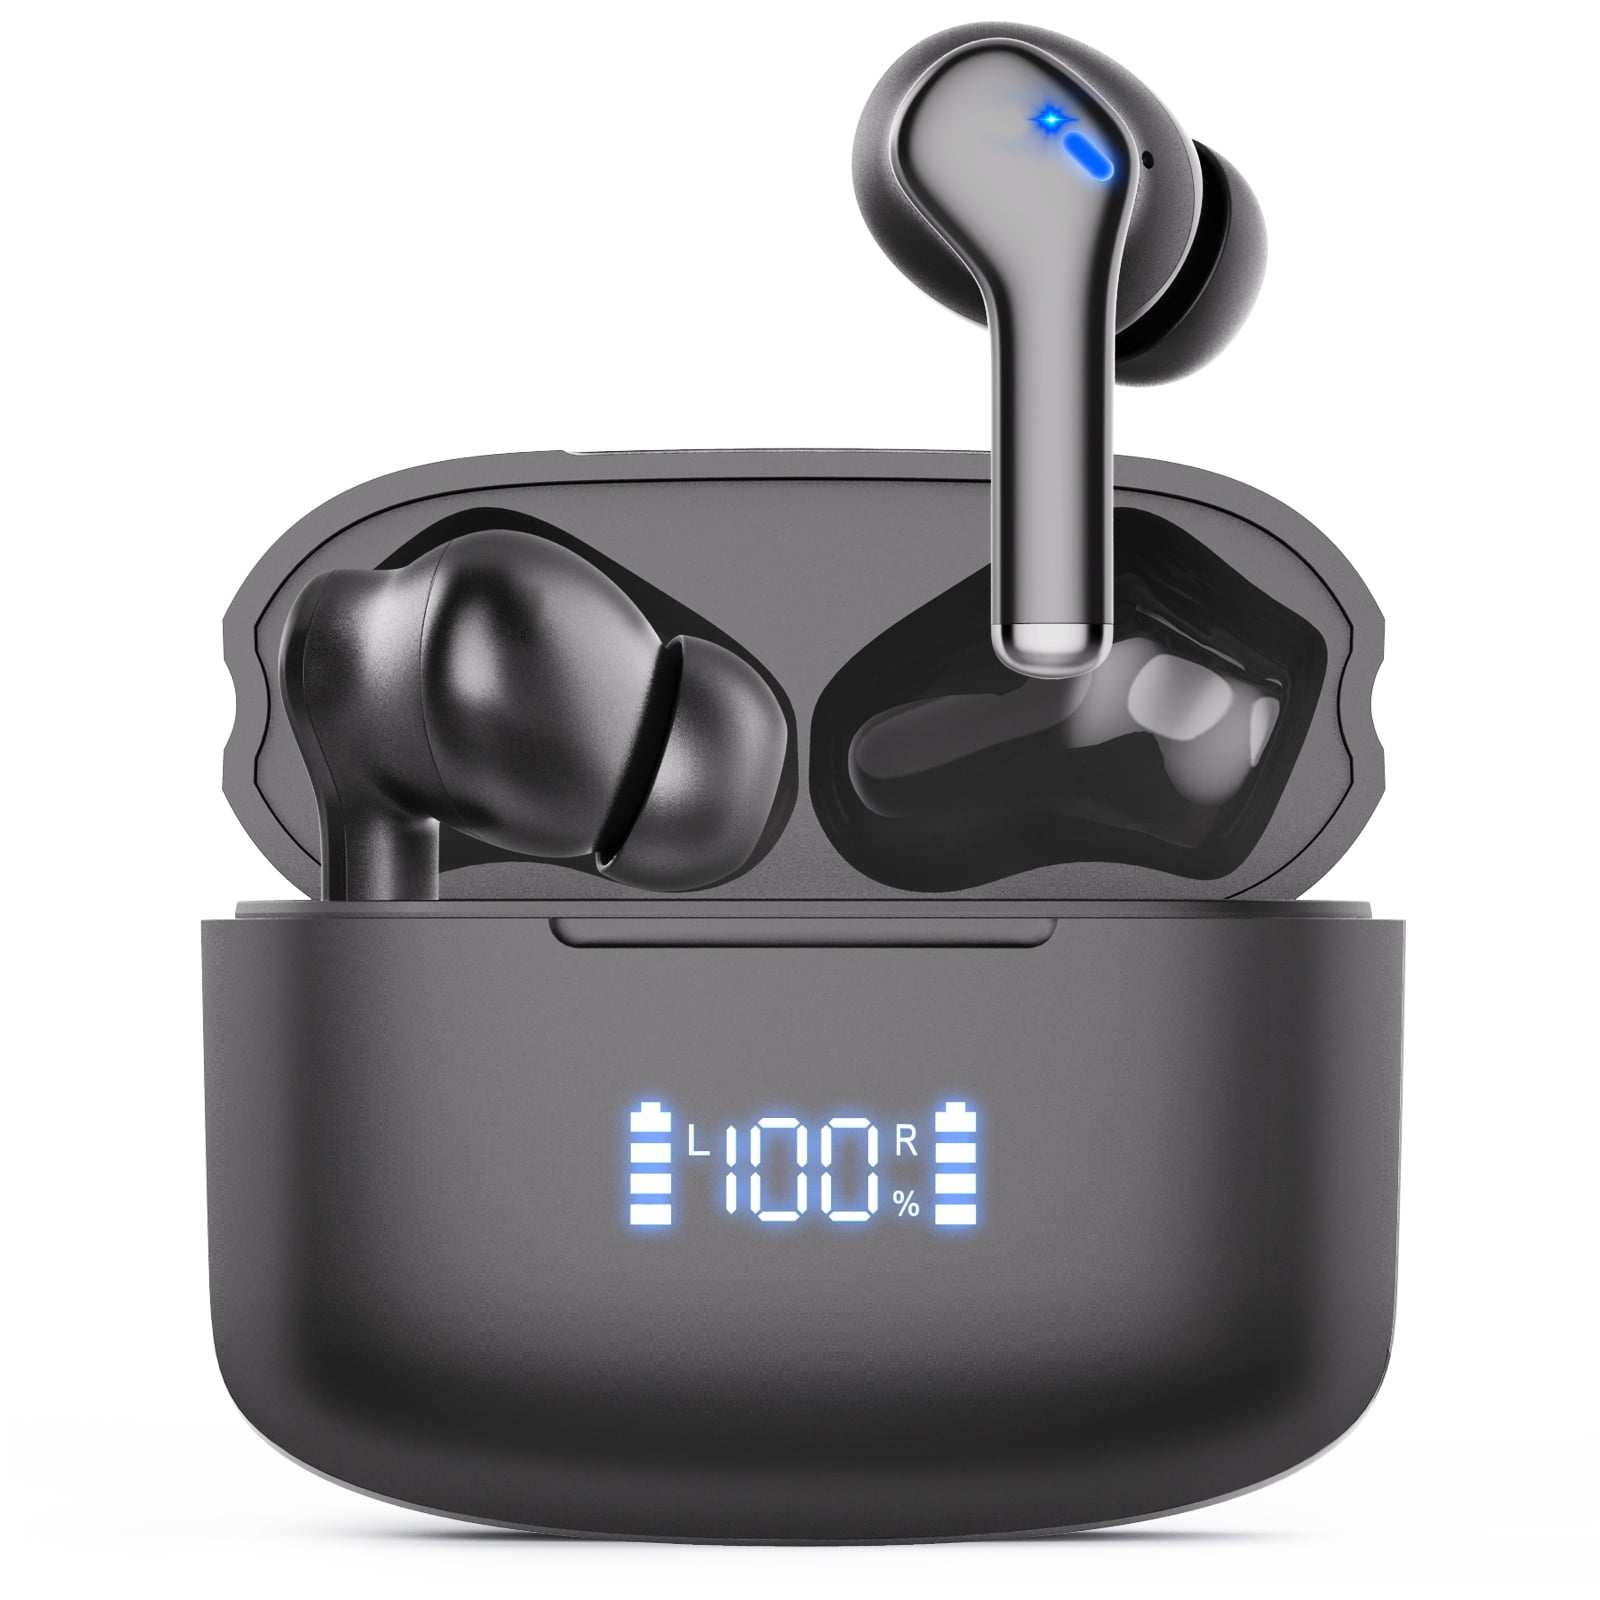 Deep Bass in Ear Sports Earphones with LED Display IPX7 Waterproof Bluetooth Earbuds for Workout Running 80 Hours of Playtime Wireless Earbuds WeurGhy Bluetooth 5.1 Headphones with HD Microphone 